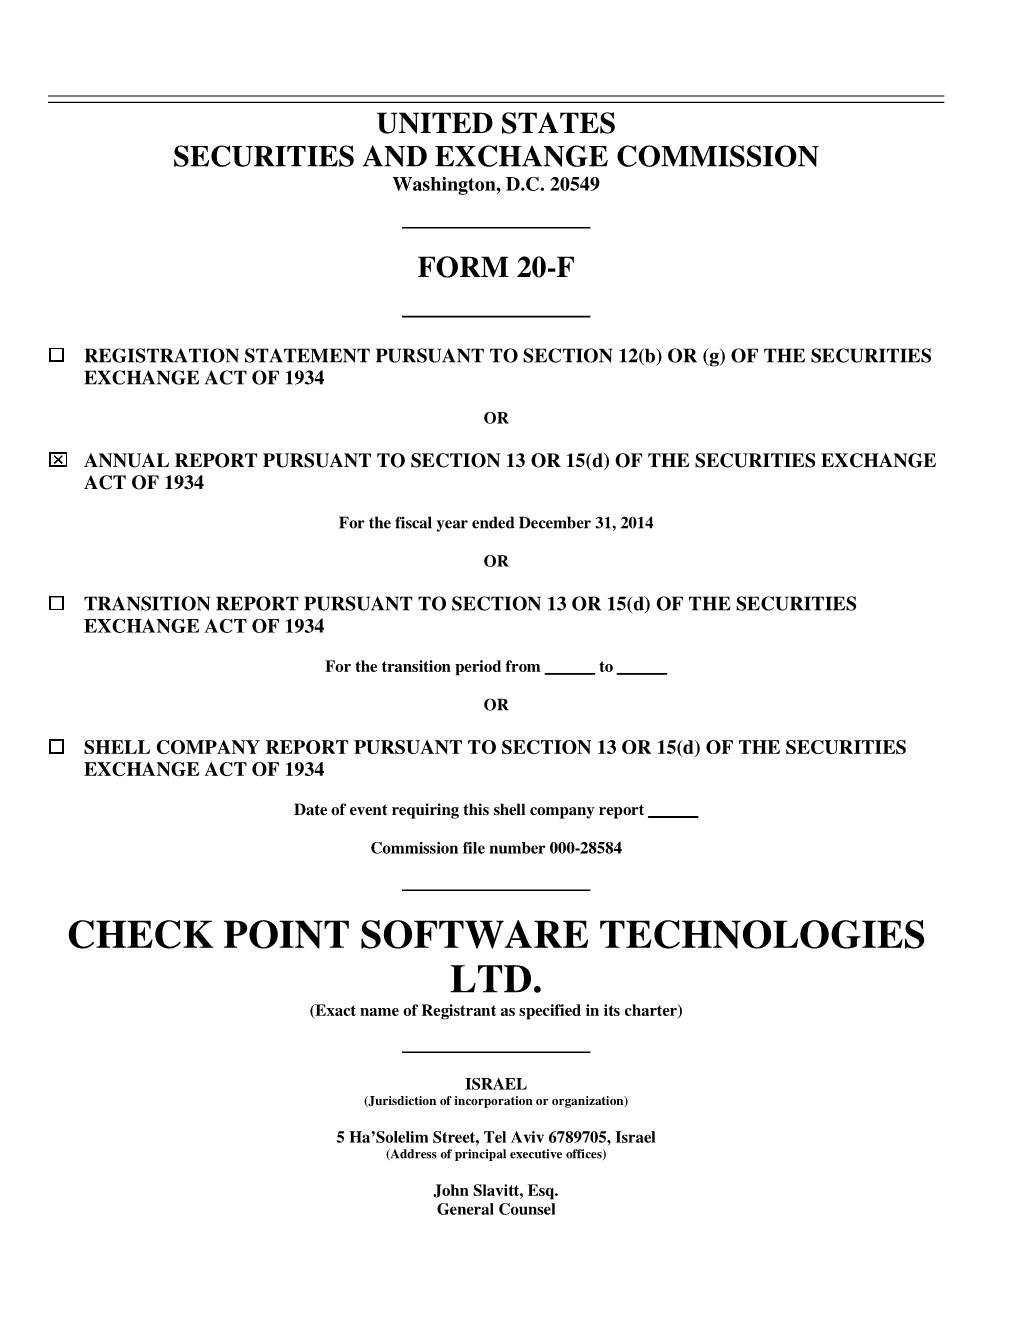 Check Point 2014 Securities Exchange Form 20-F